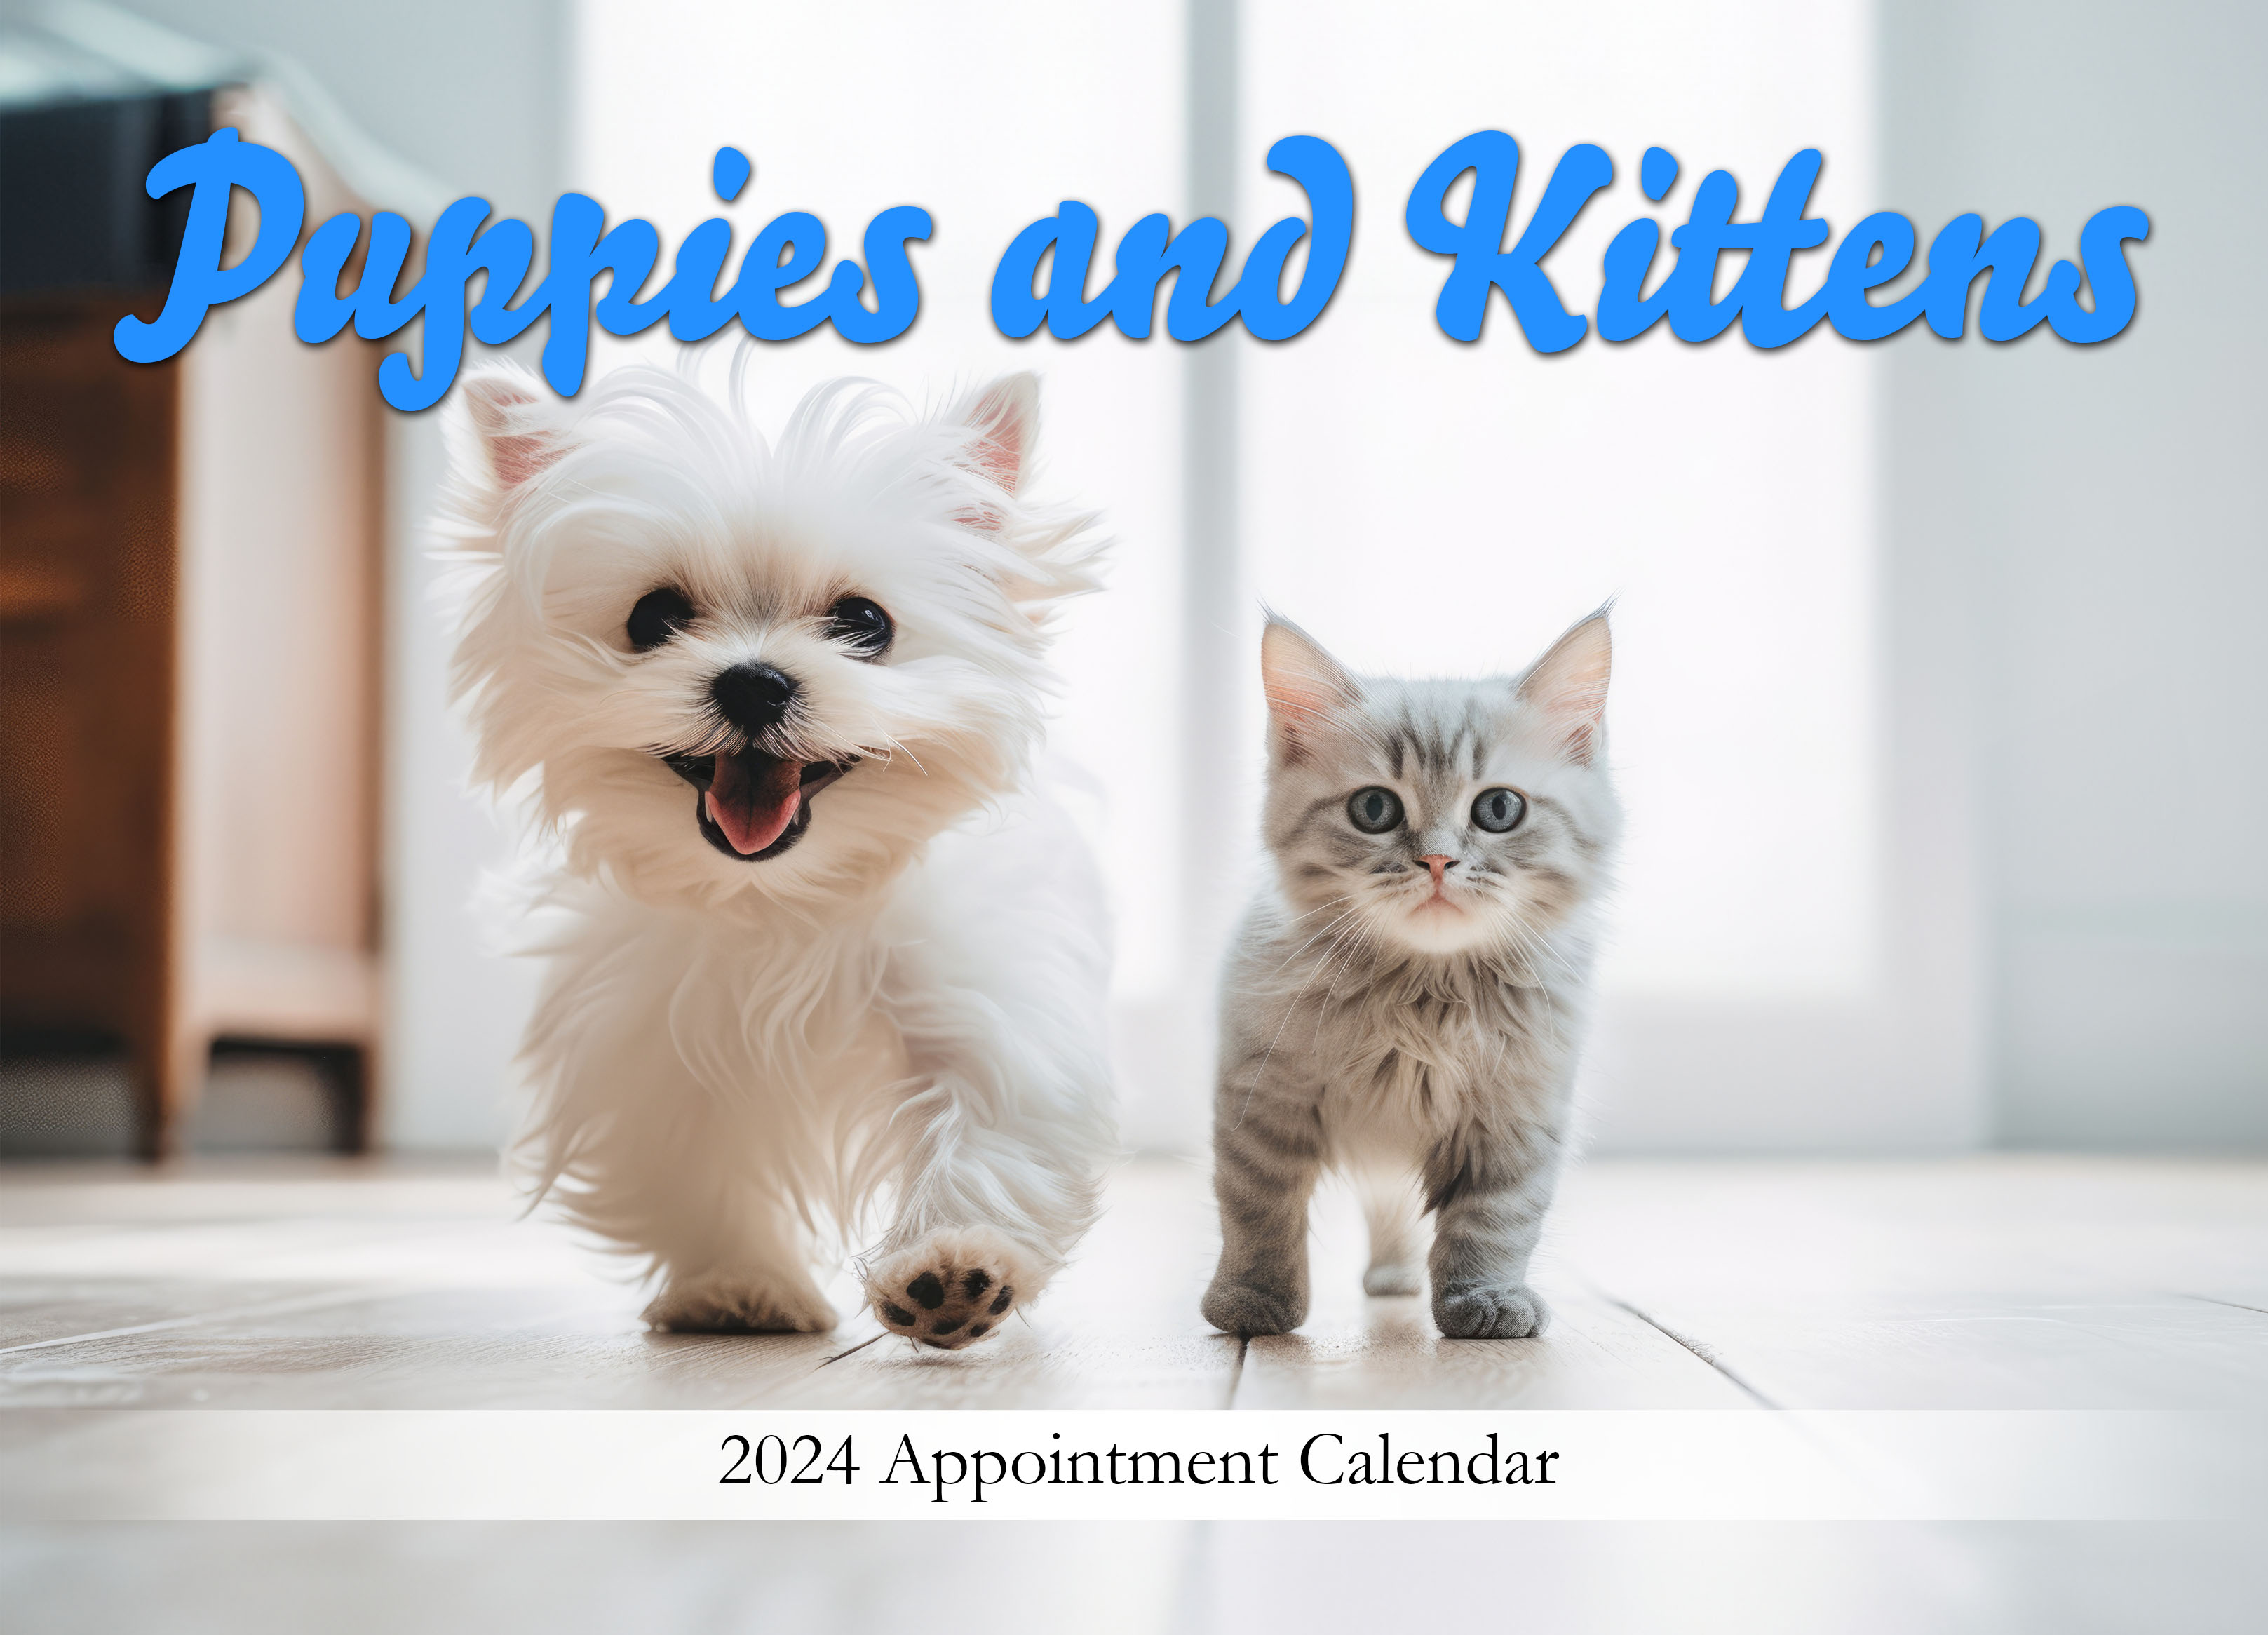 Puppies and Kittens Spiral Bound Wall Calendar CPS/Keystone